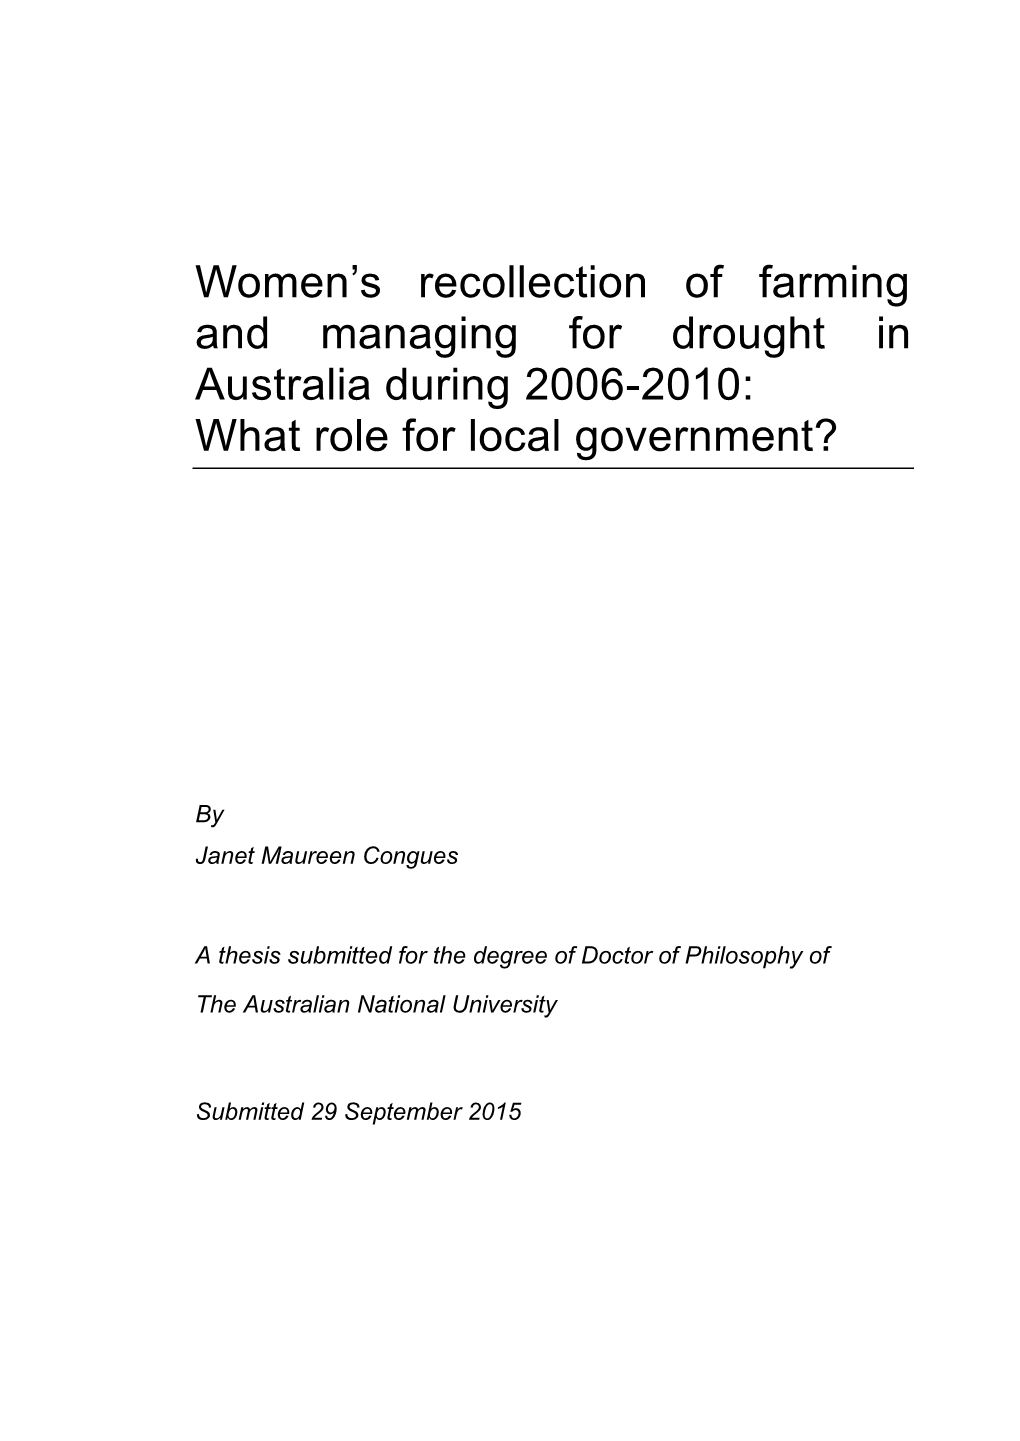 Women's Recollection of Farming and Managing for Drought in Australia During 2006-2010